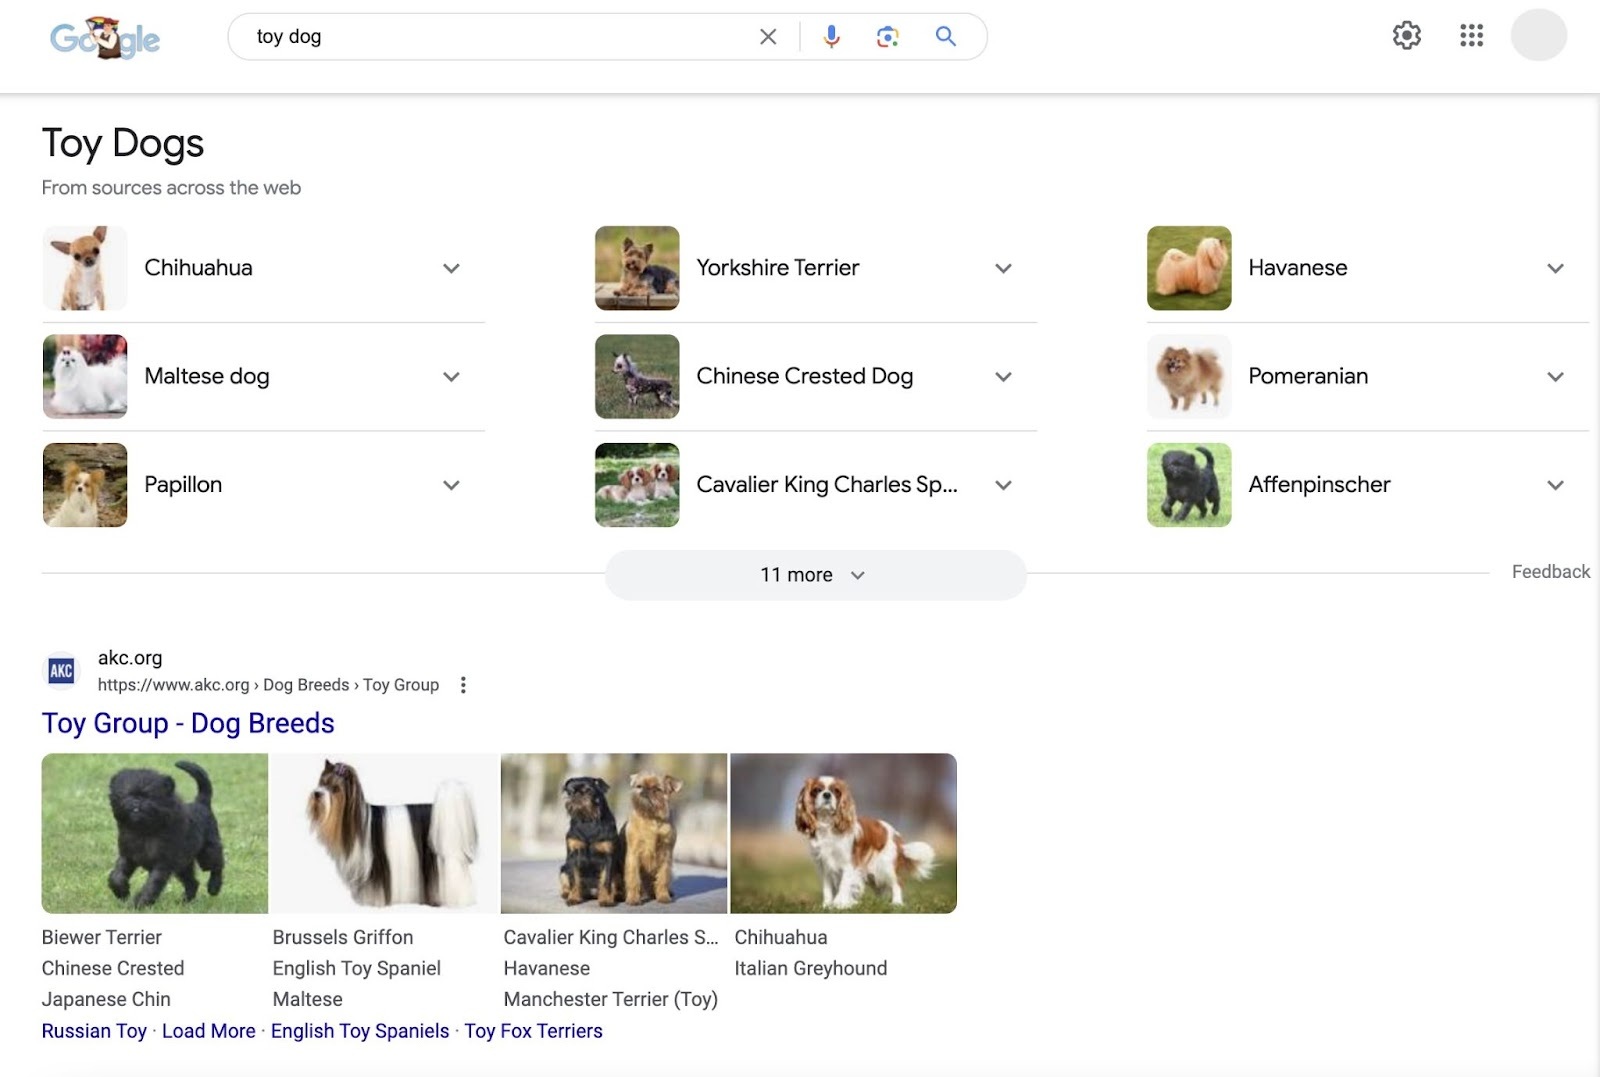 Google results for a “toy dog” search